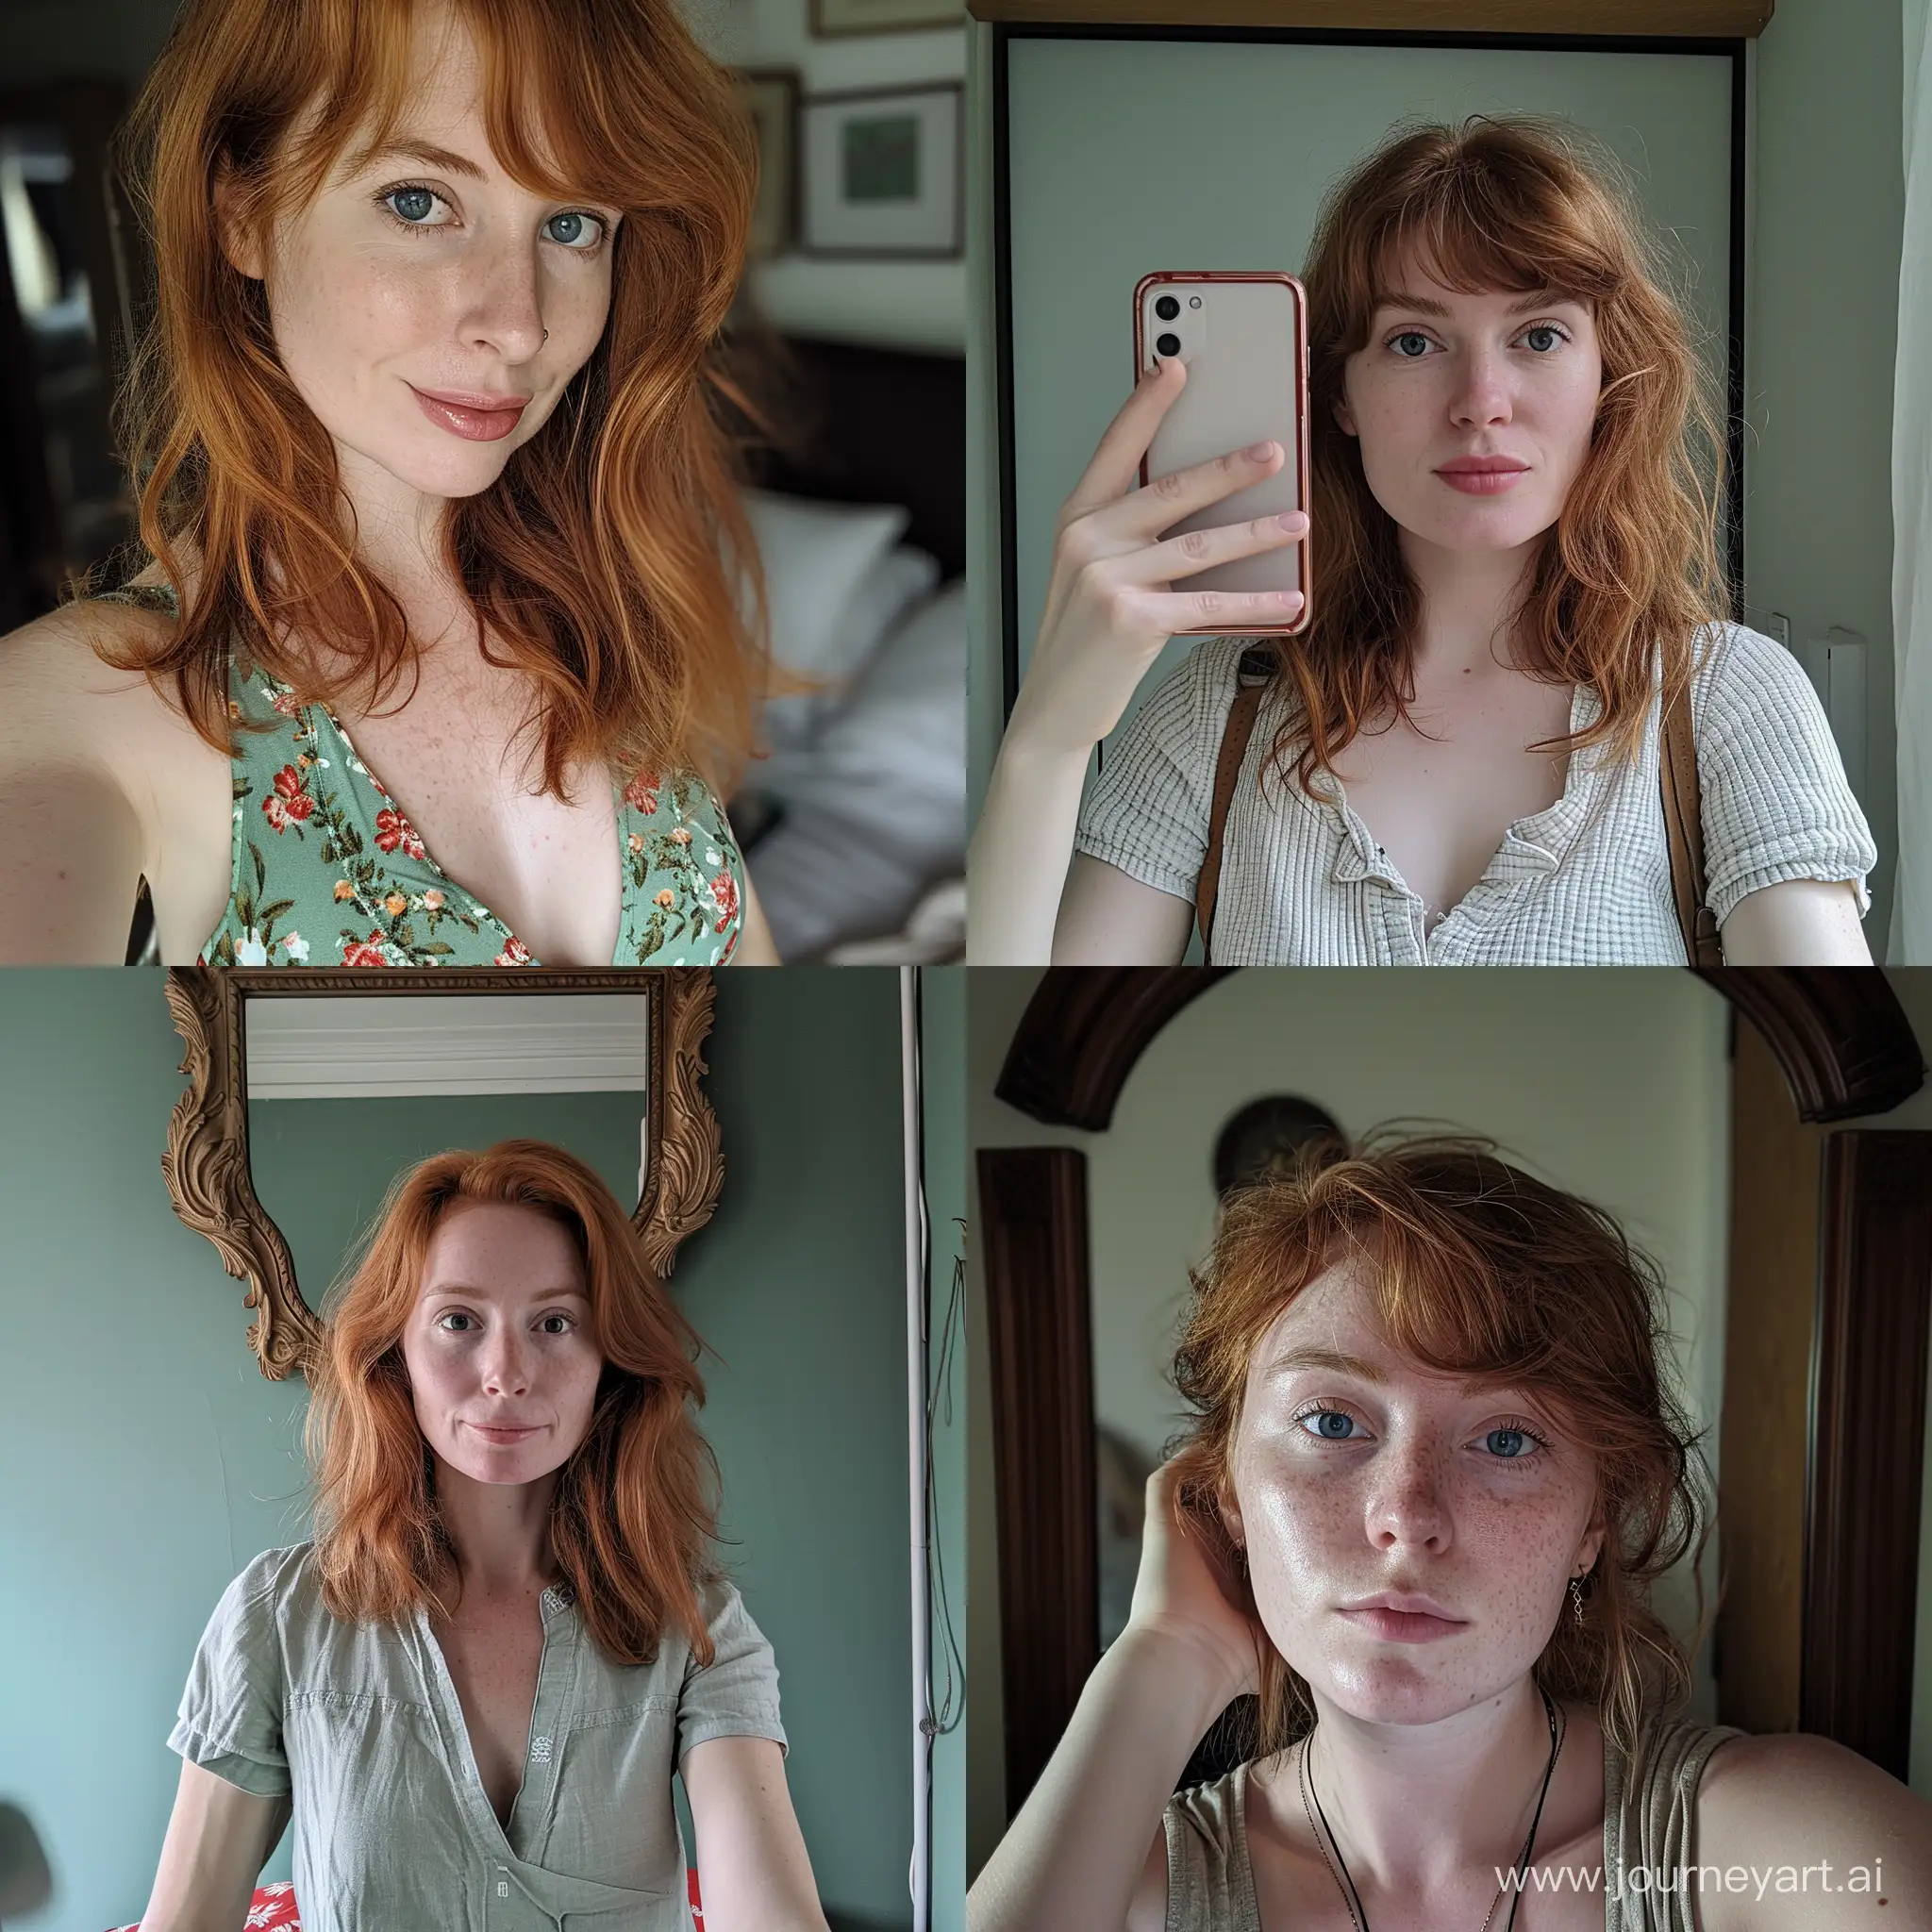 Interior selfie of a woman with redhead, shot on a low camera quality phone